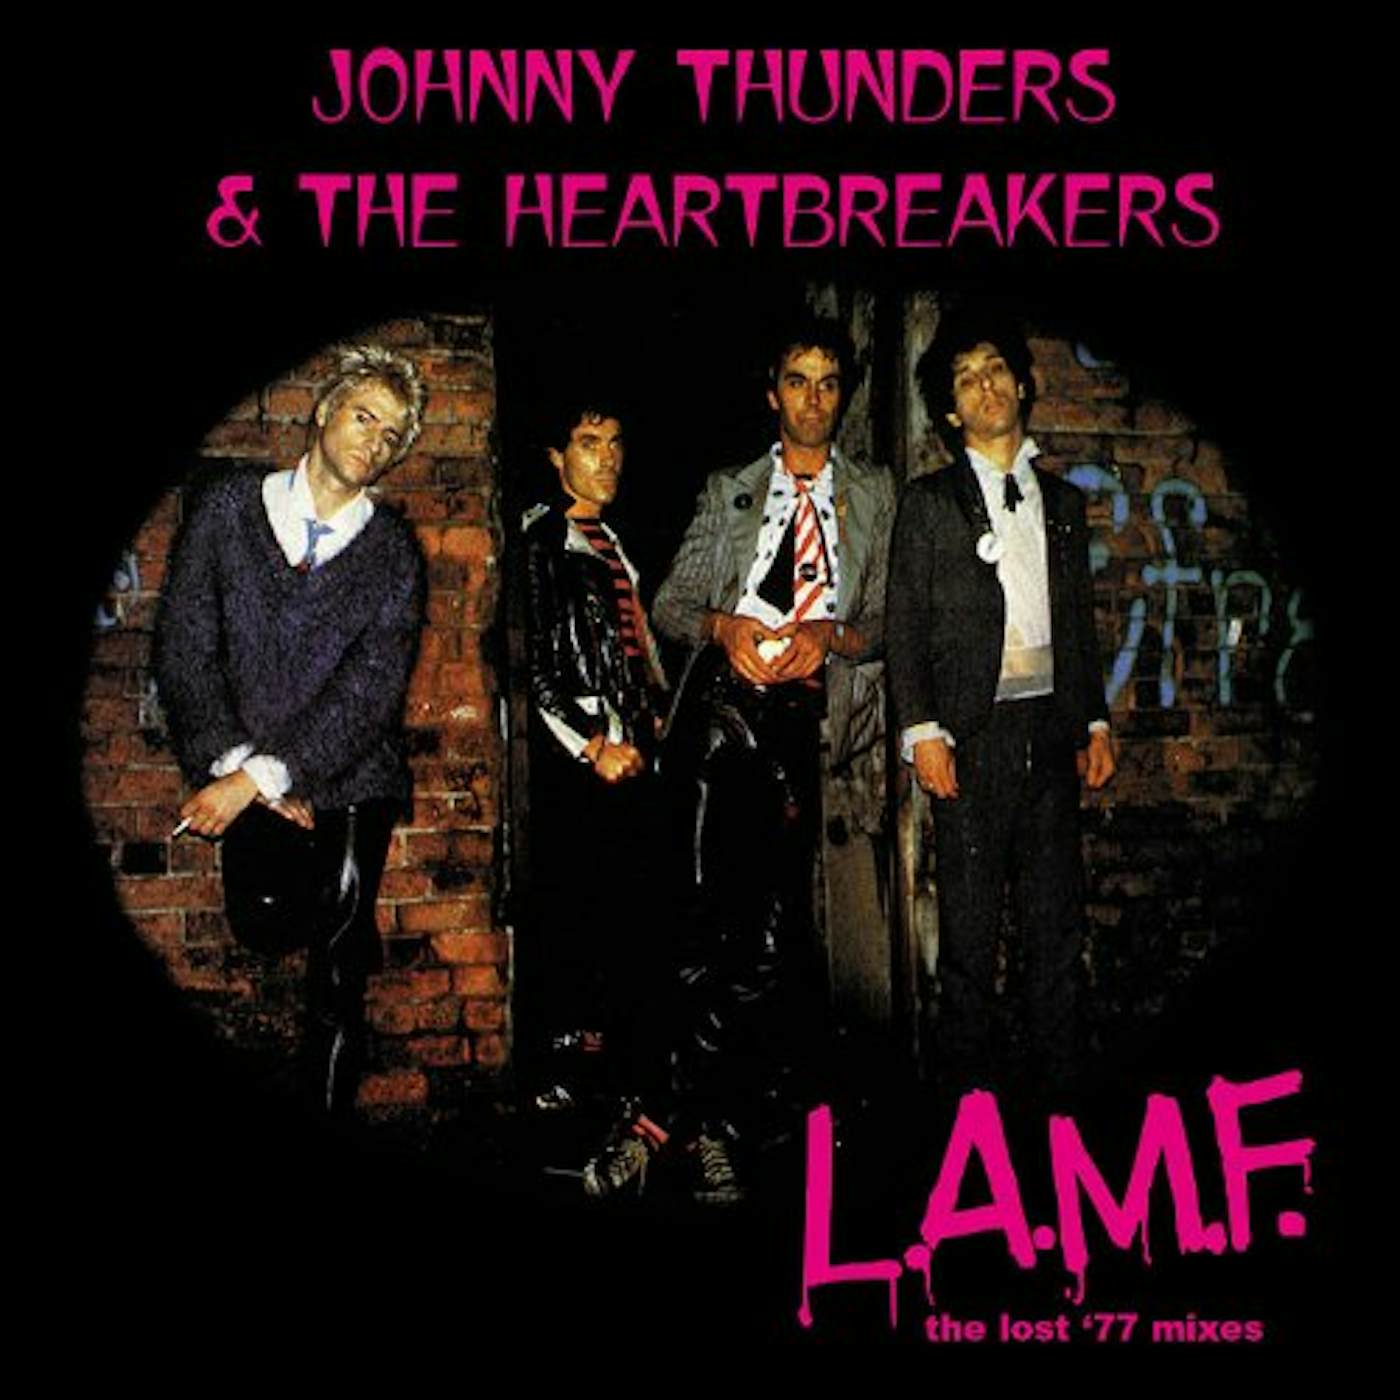 Johnny Thunders & The Heartbreakers L.A.M.F.: THE LOST '77 MIXES' (REMASTERED) CD